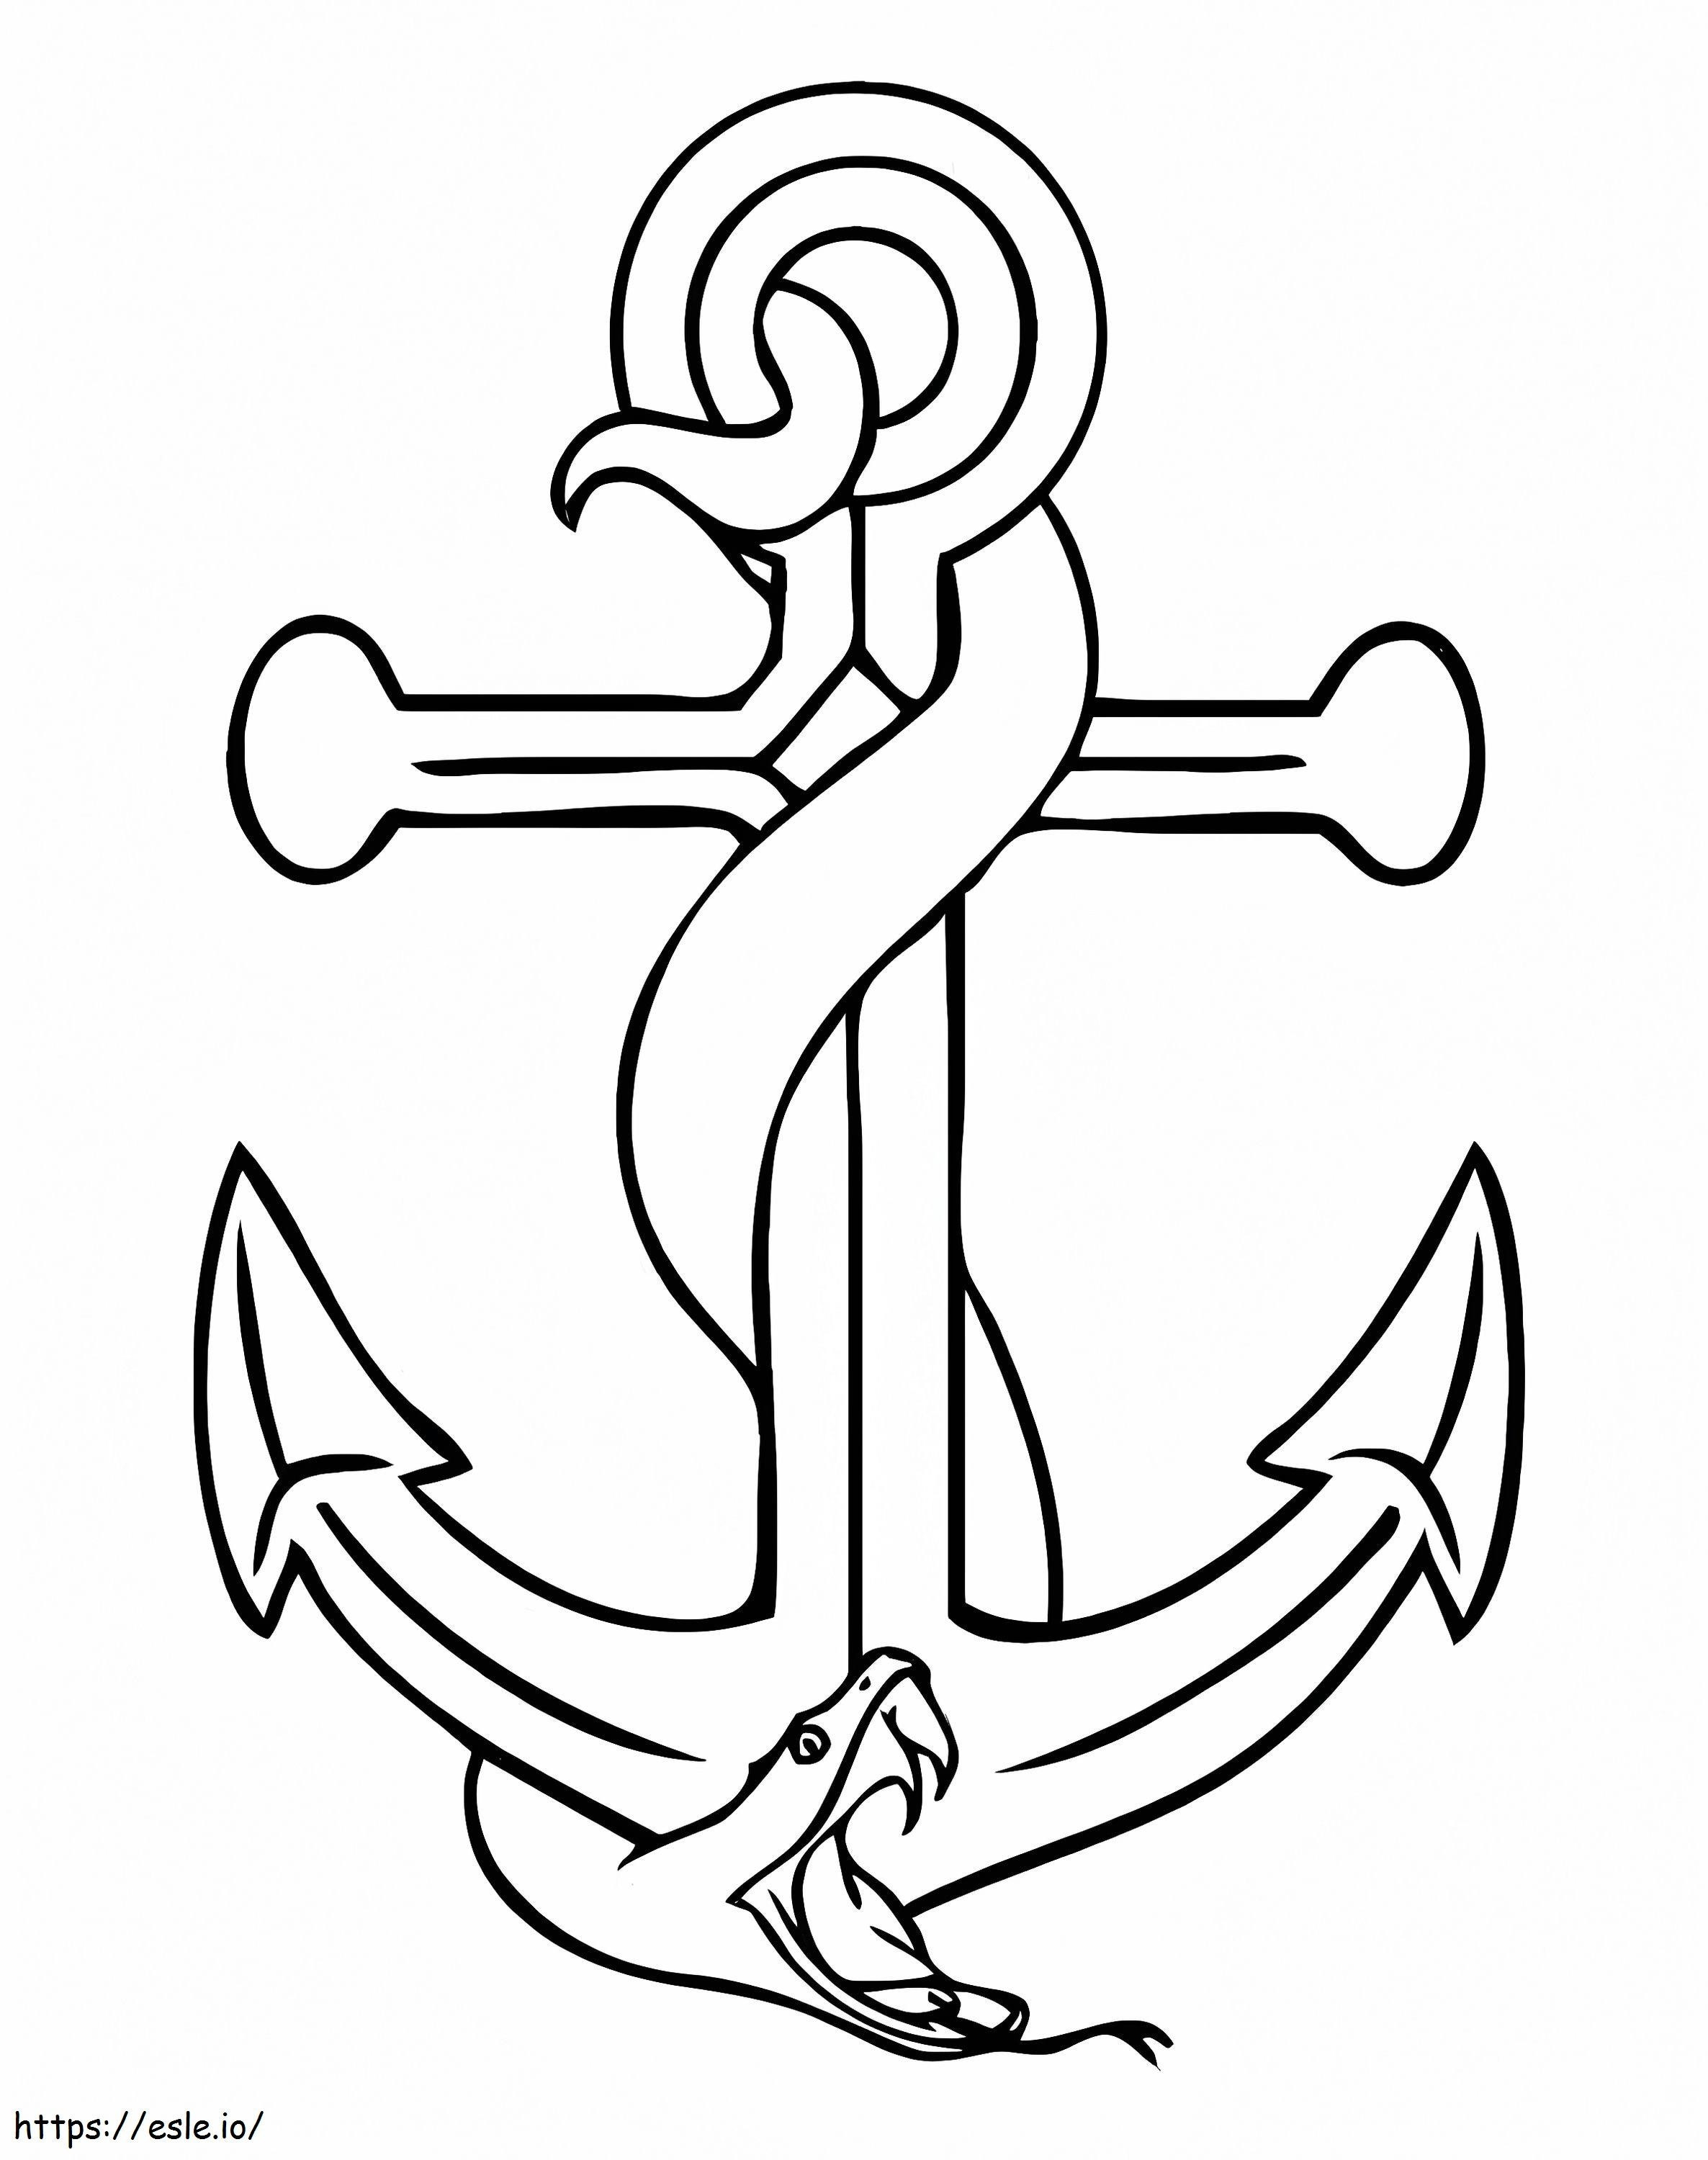 Snake Coiled Around The Anchor coloring page